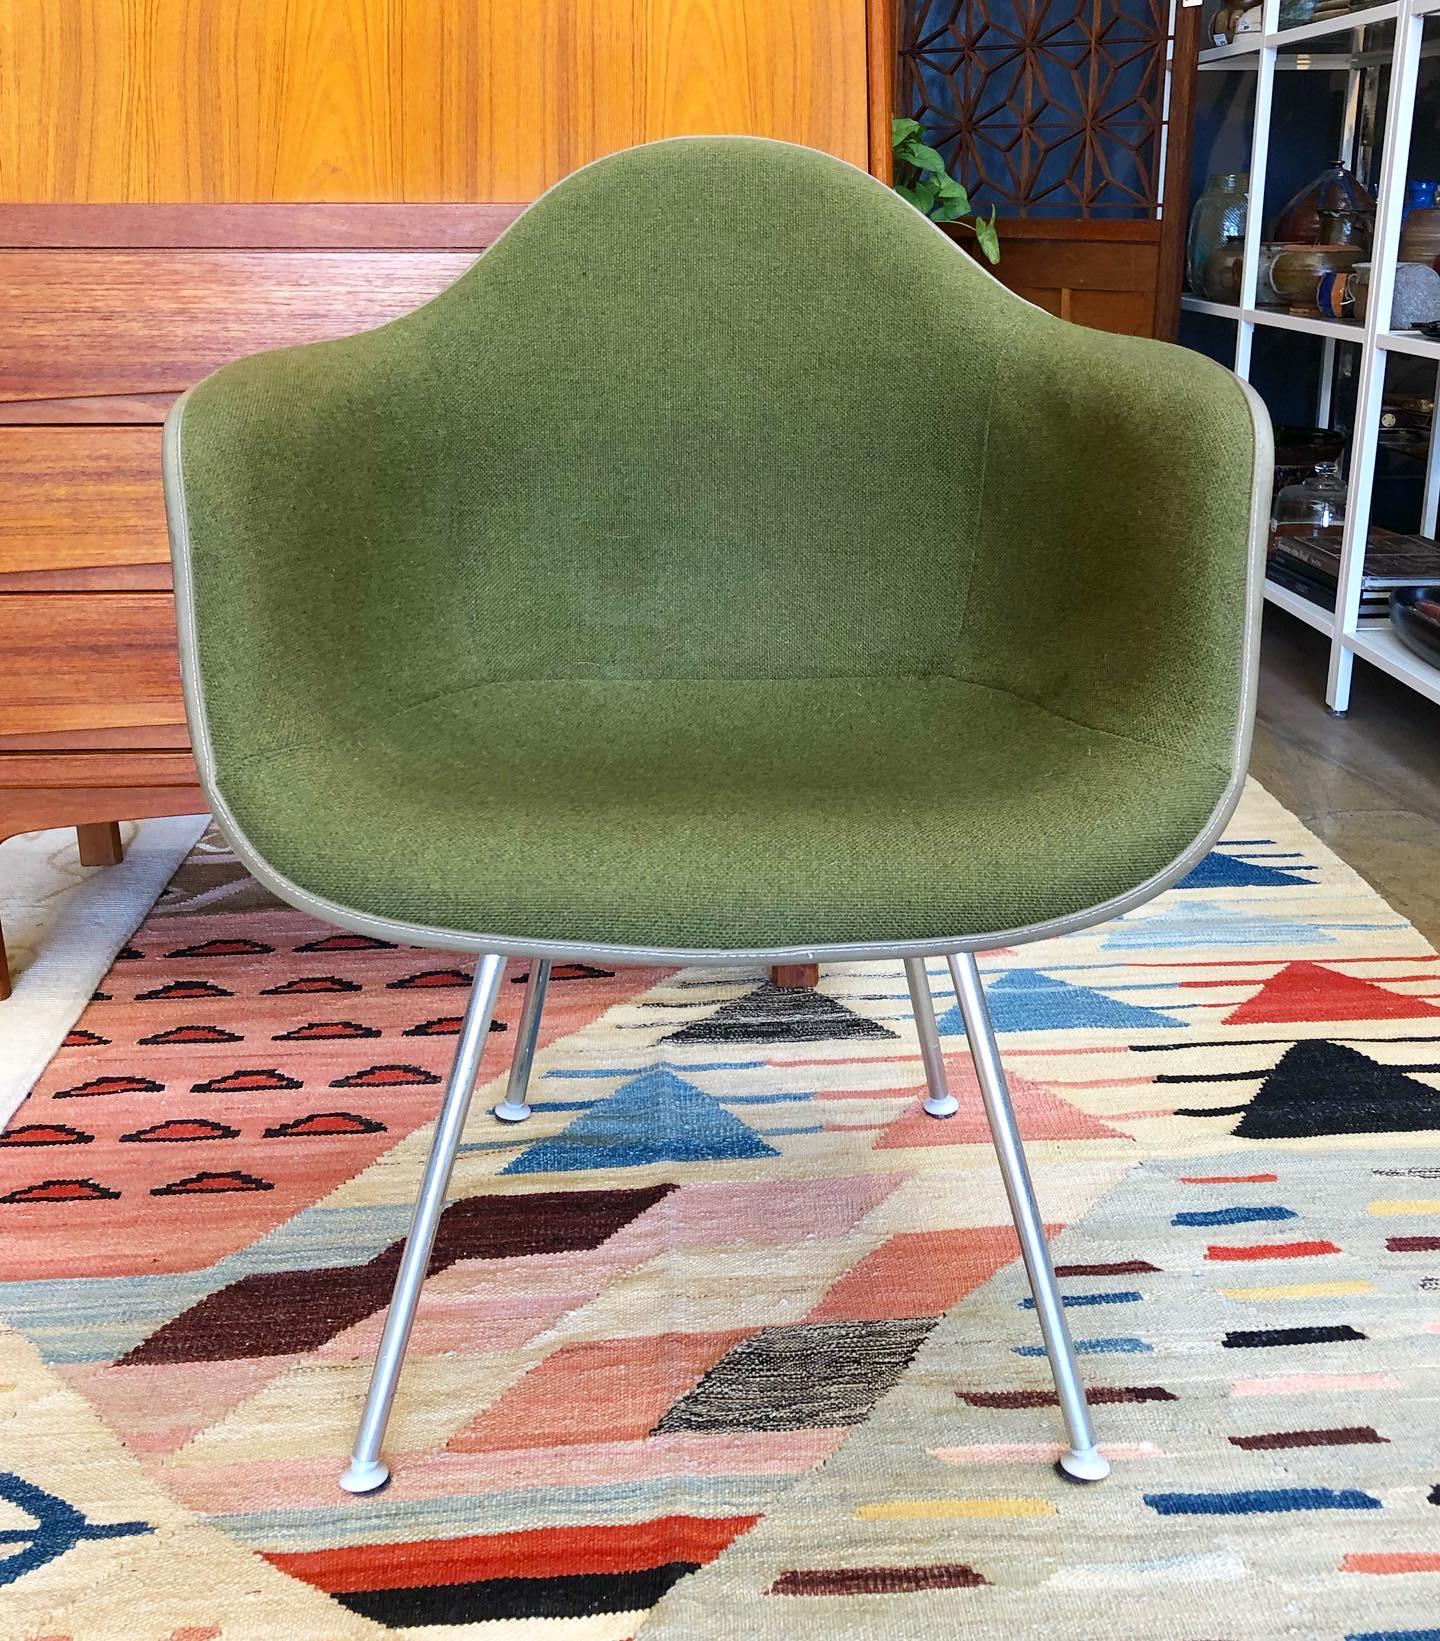 A mid century molded fiberglass armchair by Charles and Ray Eames for Herman Miller. Features an upholstered interior with a woven avocado green fabric. The fiberglass shell is a light beige color. Stands on a 4 metal leg base. Stamped by Herman